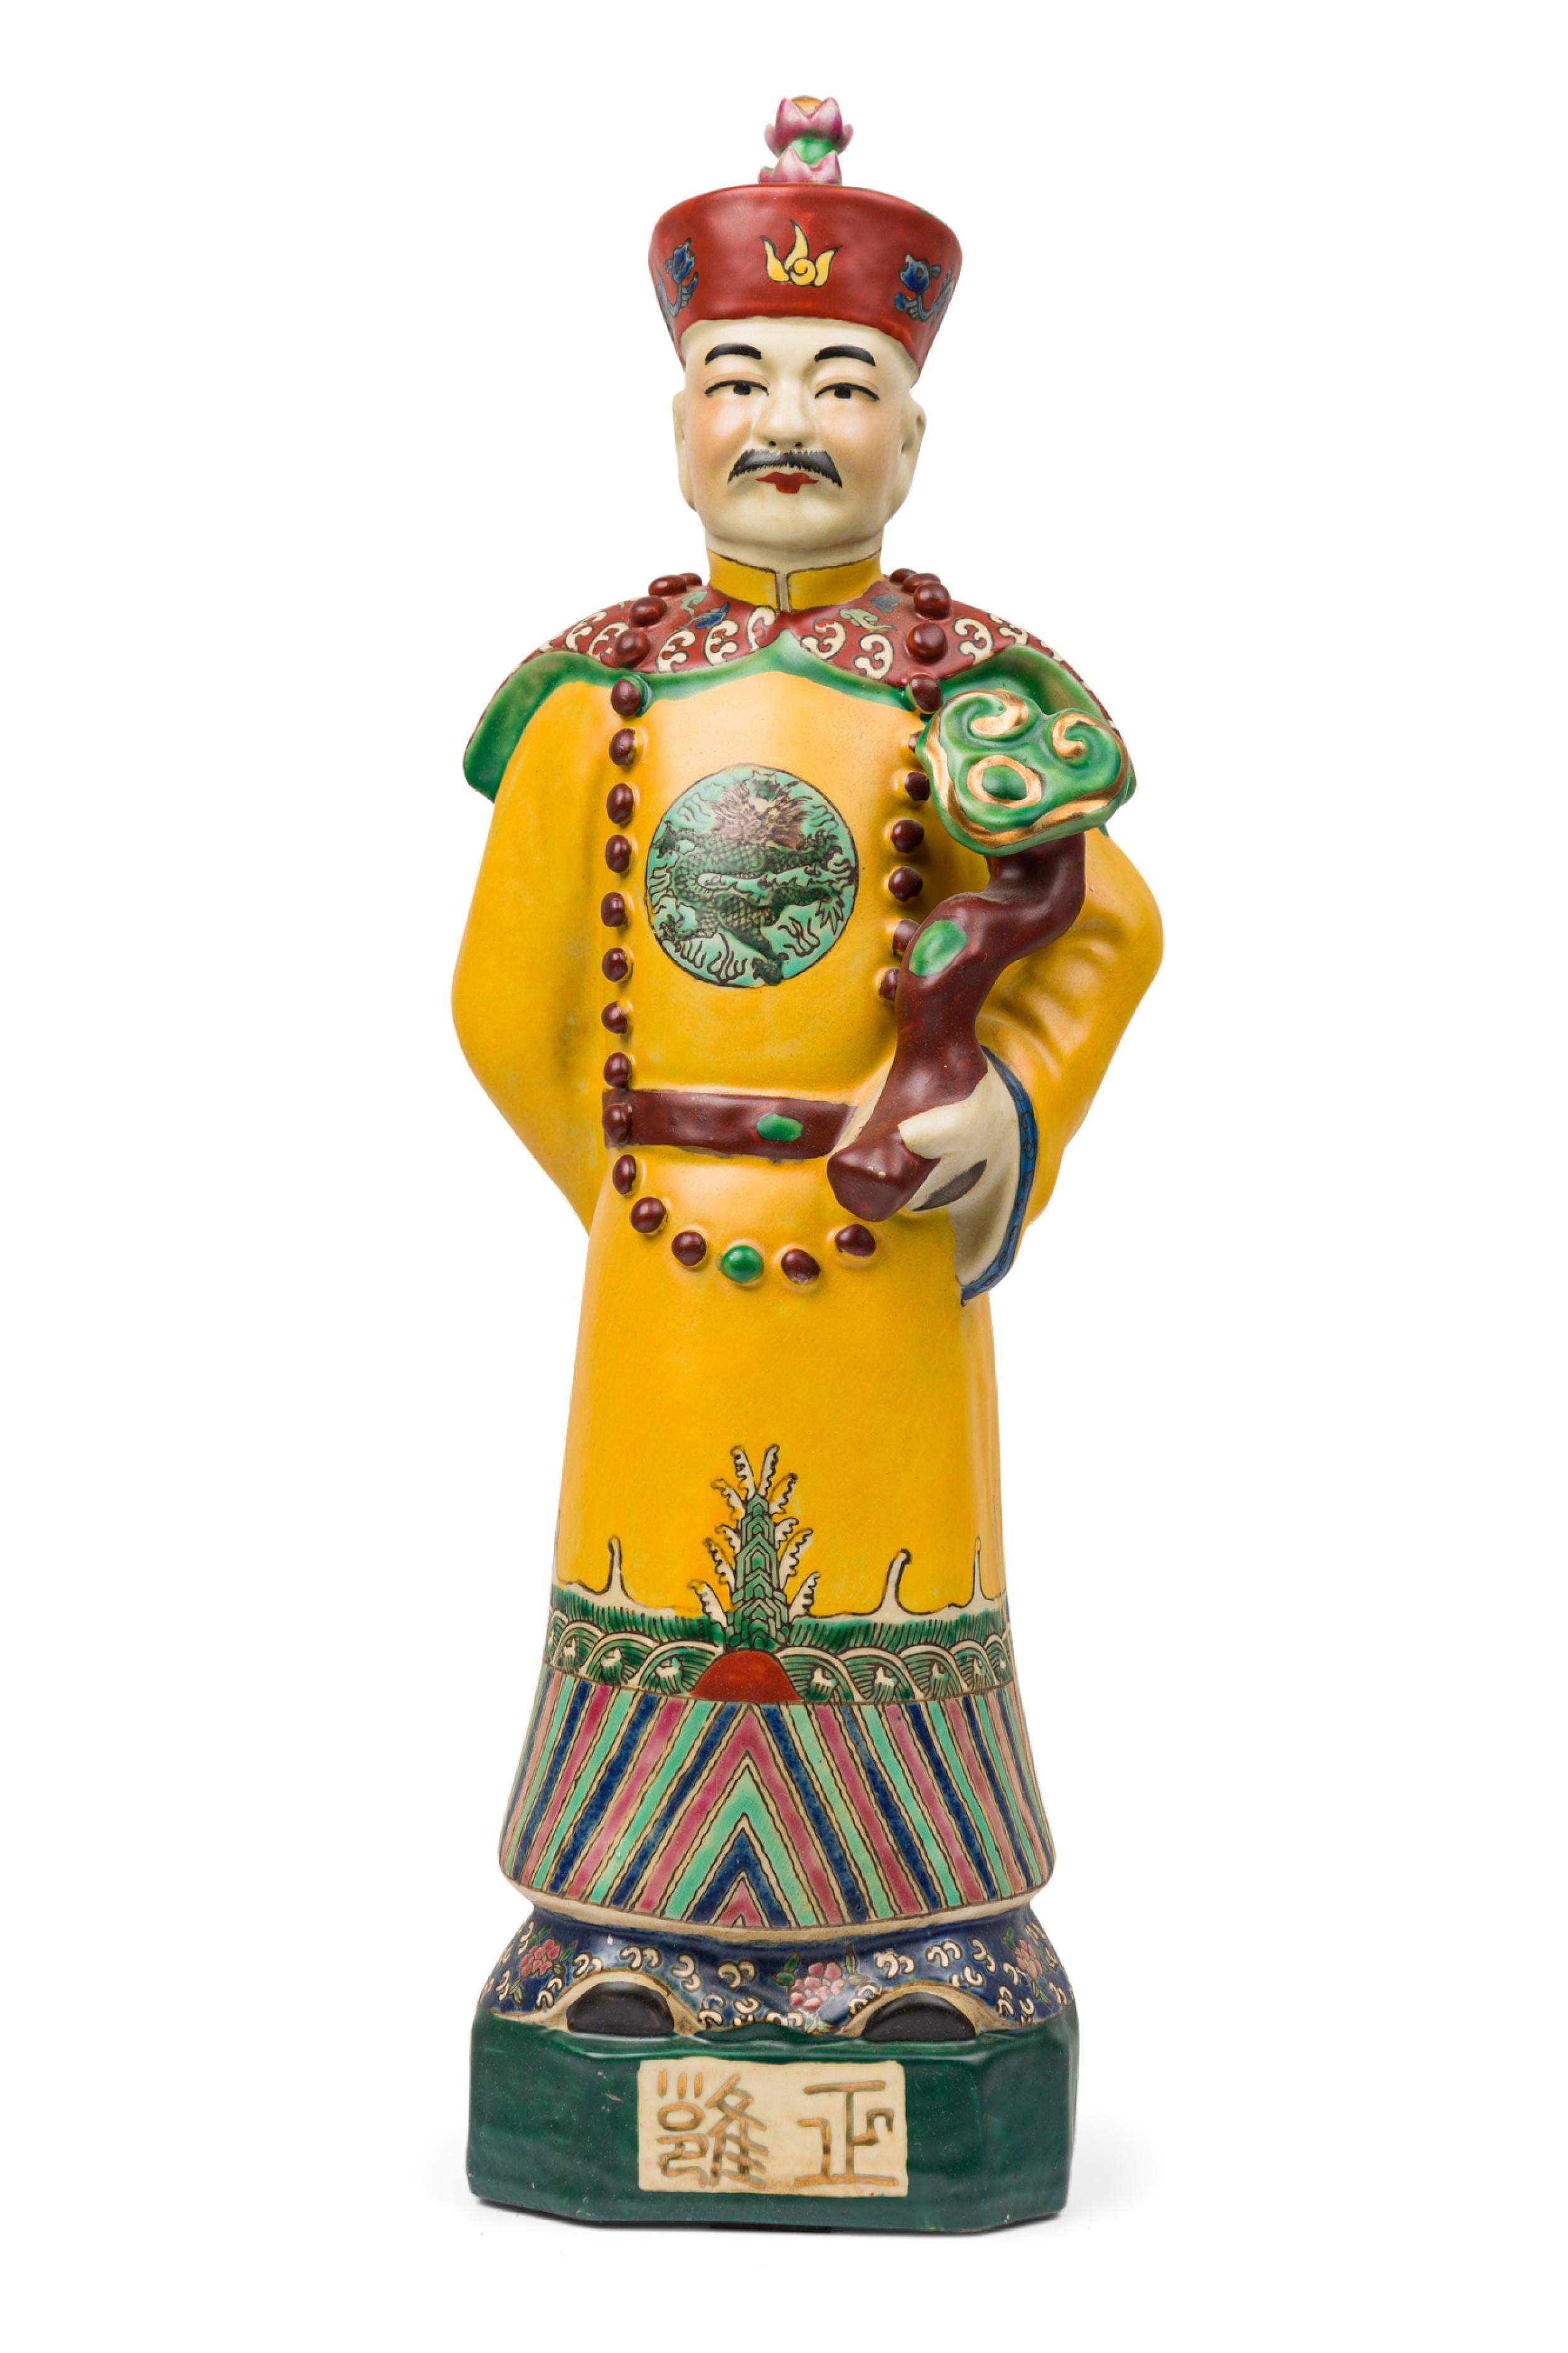 PAIR of Chinese painted ceramic identical figures in a matte glaze, depicting a mustached, hatted emperor in a formal elaborate yellow robe with dragon medallion, his left arm cradling a lingzhi ruyi, his right arm positioned behind his back. He is